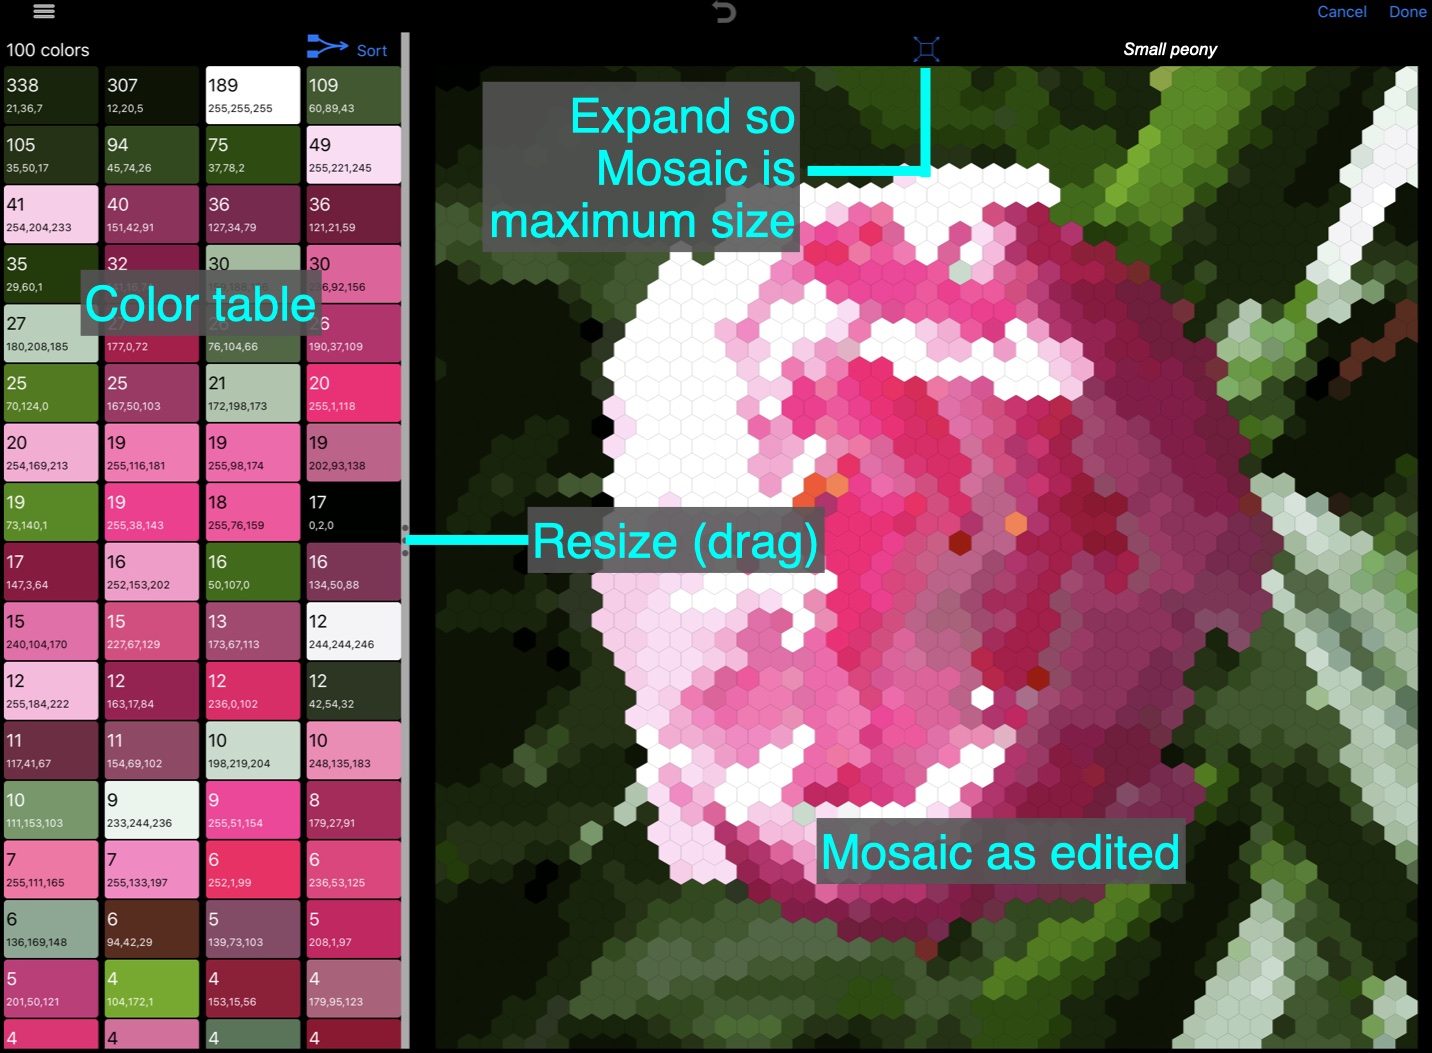 Image of mosaic editor with annotations